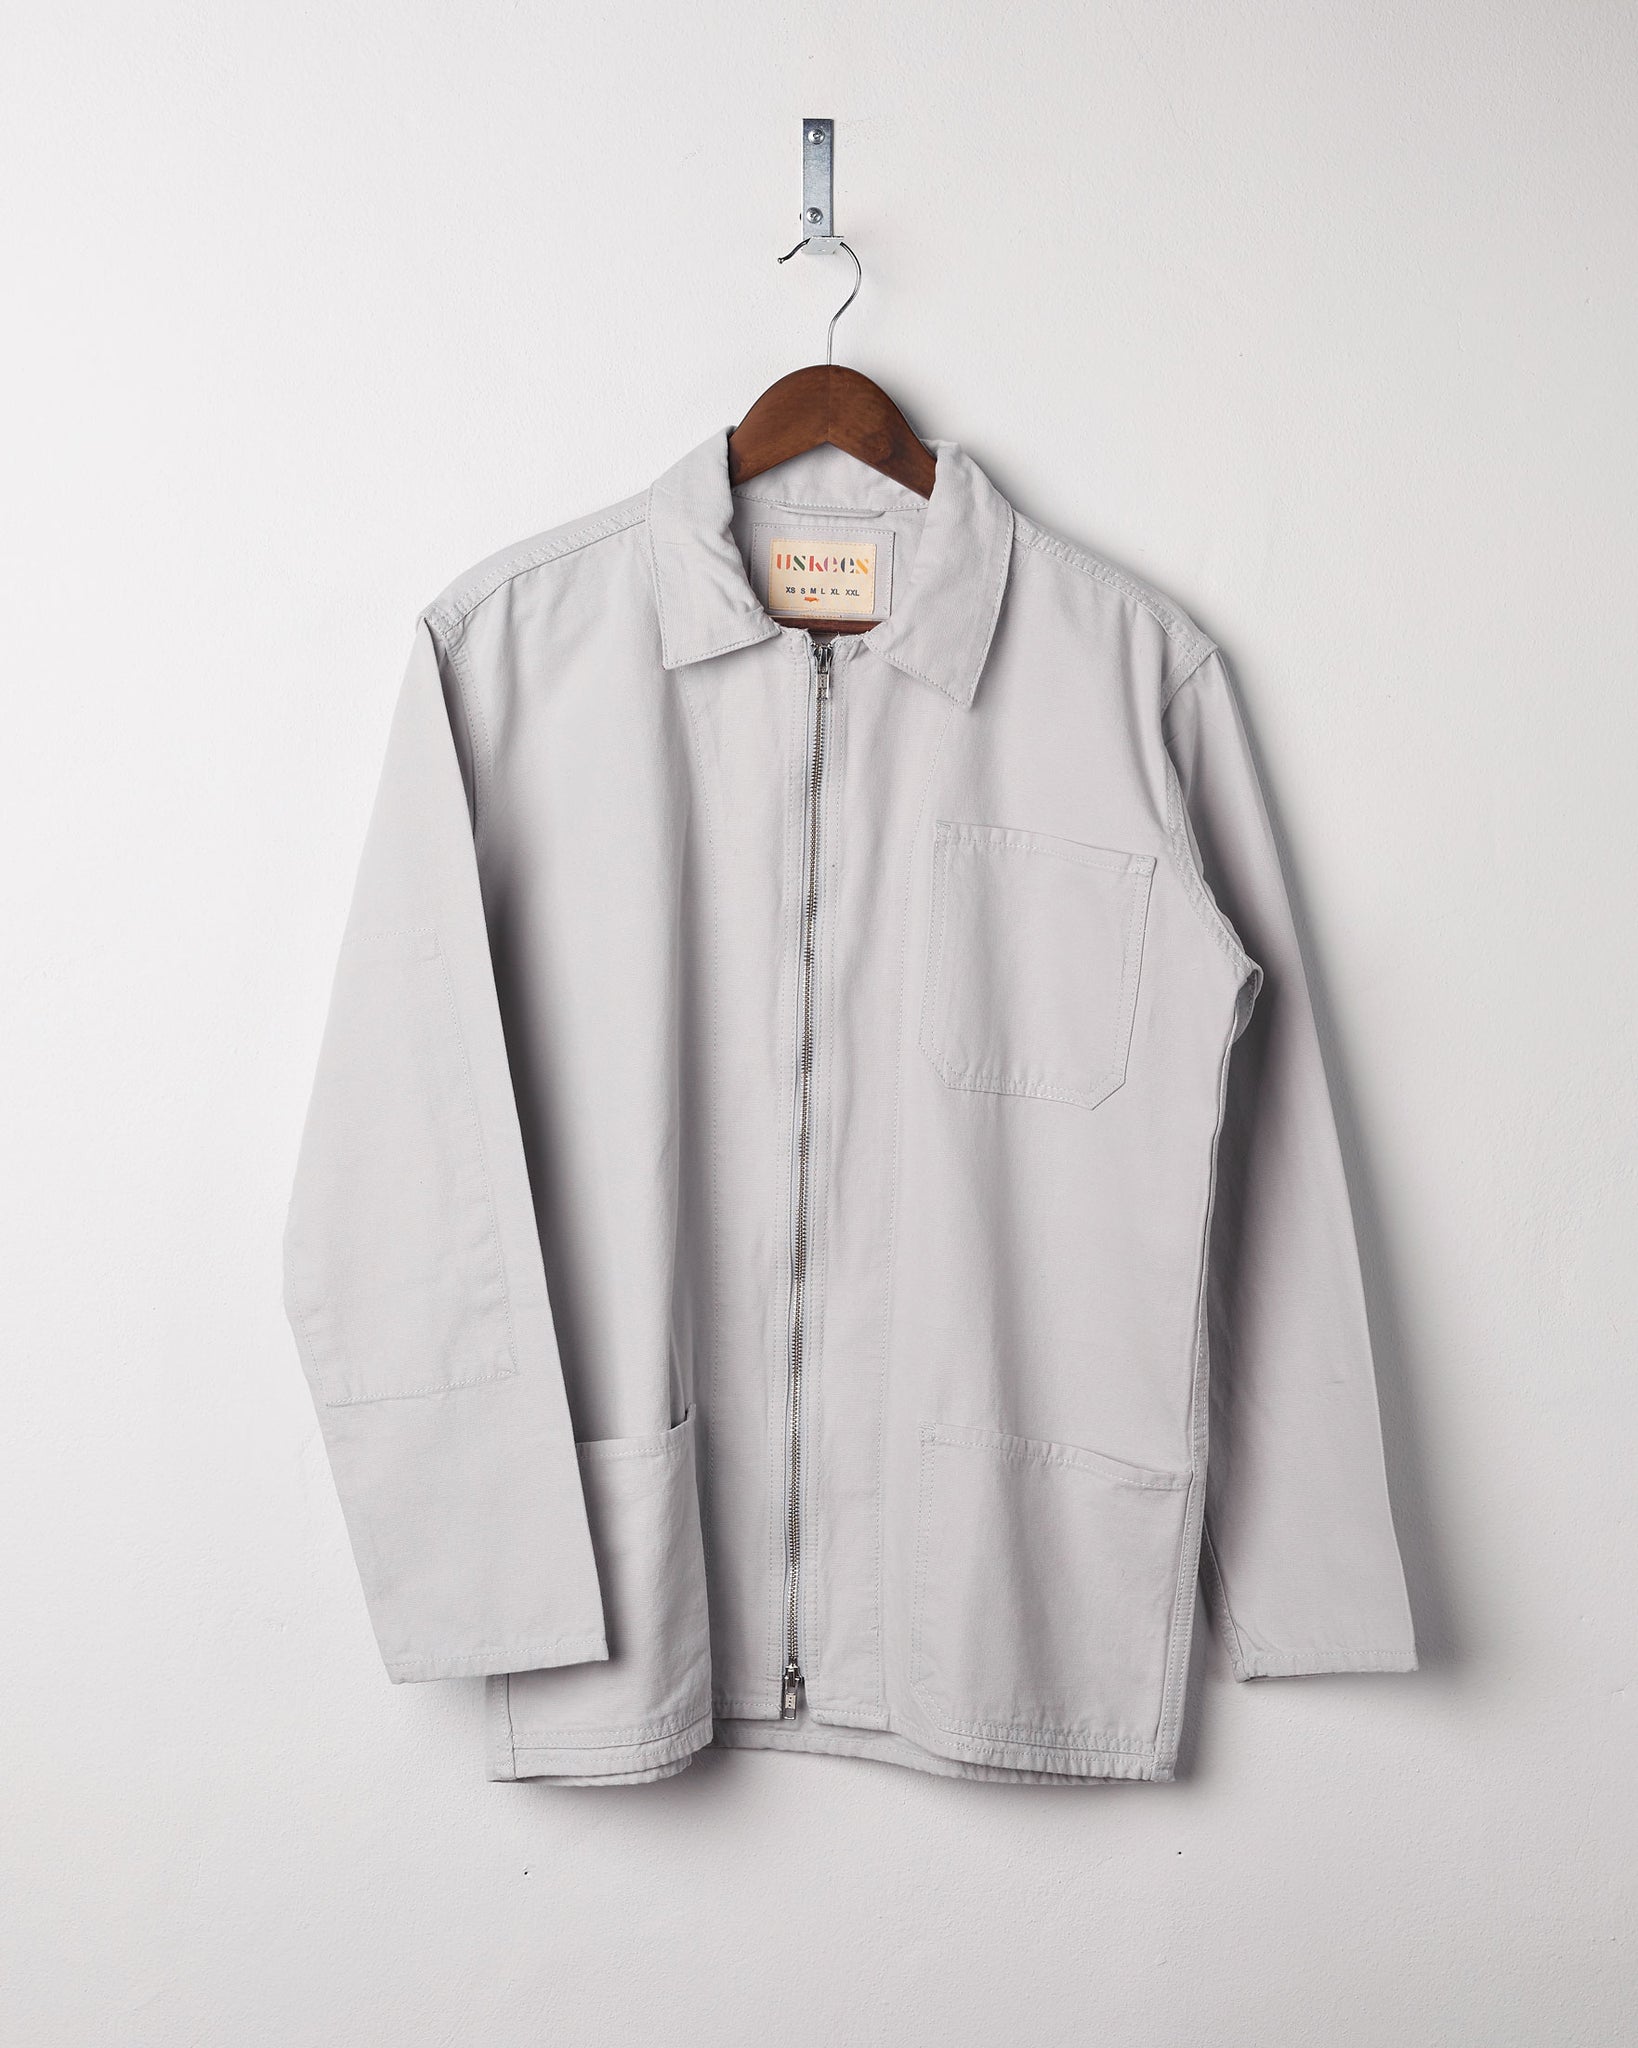 Front view of light-grey, organic cotton zip front jacket from Uskees presented on hanger with neutral backdrop.